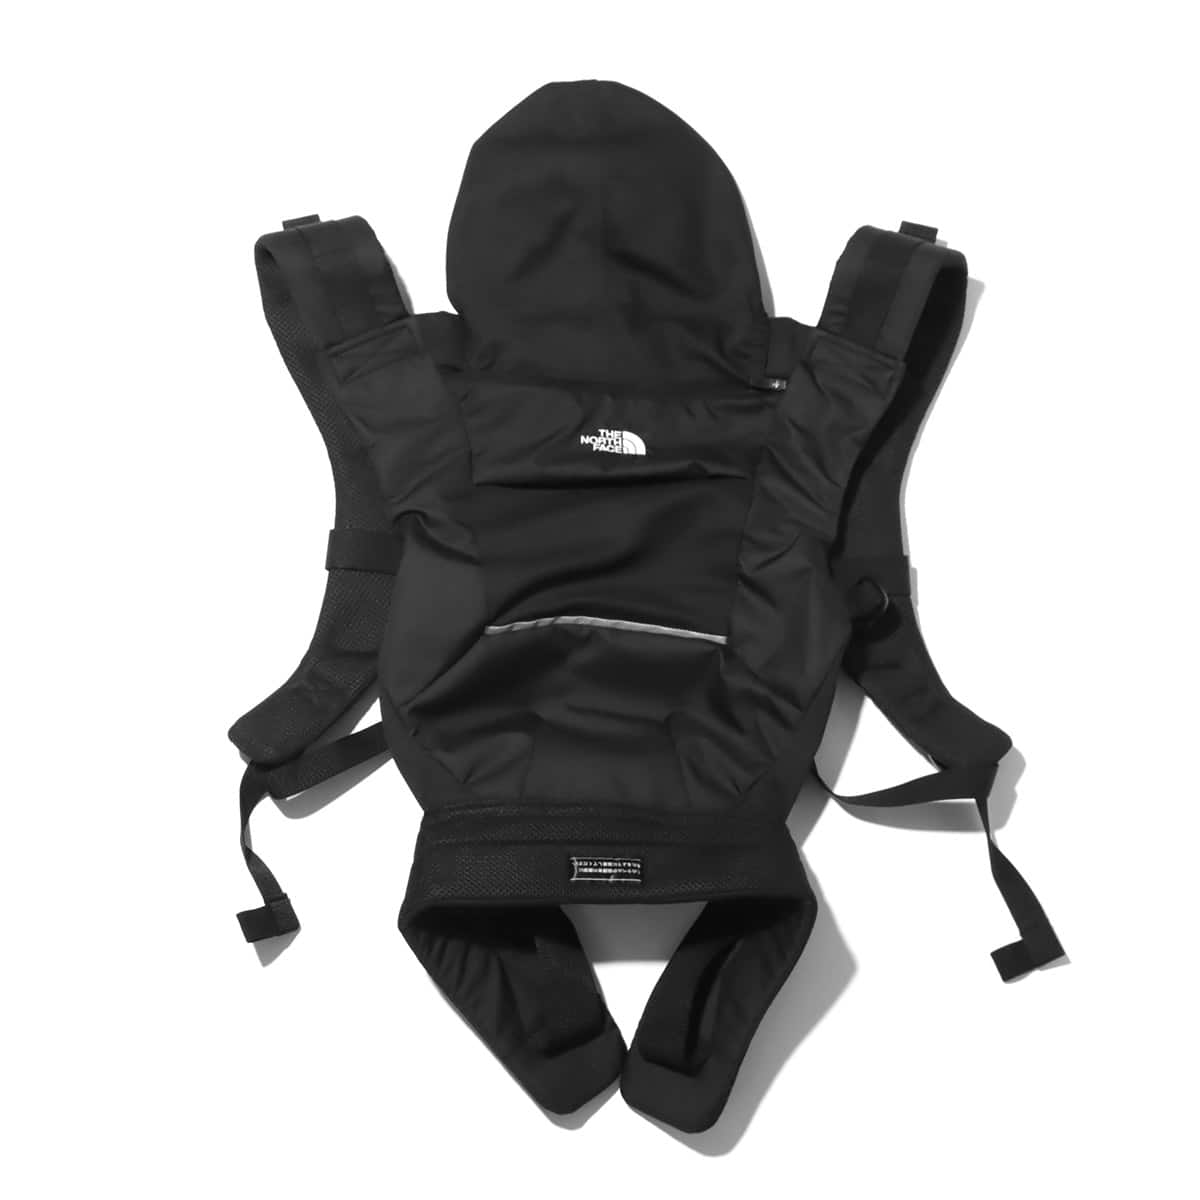 THE NORTH FACE BABY COMPACT CARRIER BLACK 23SS-I